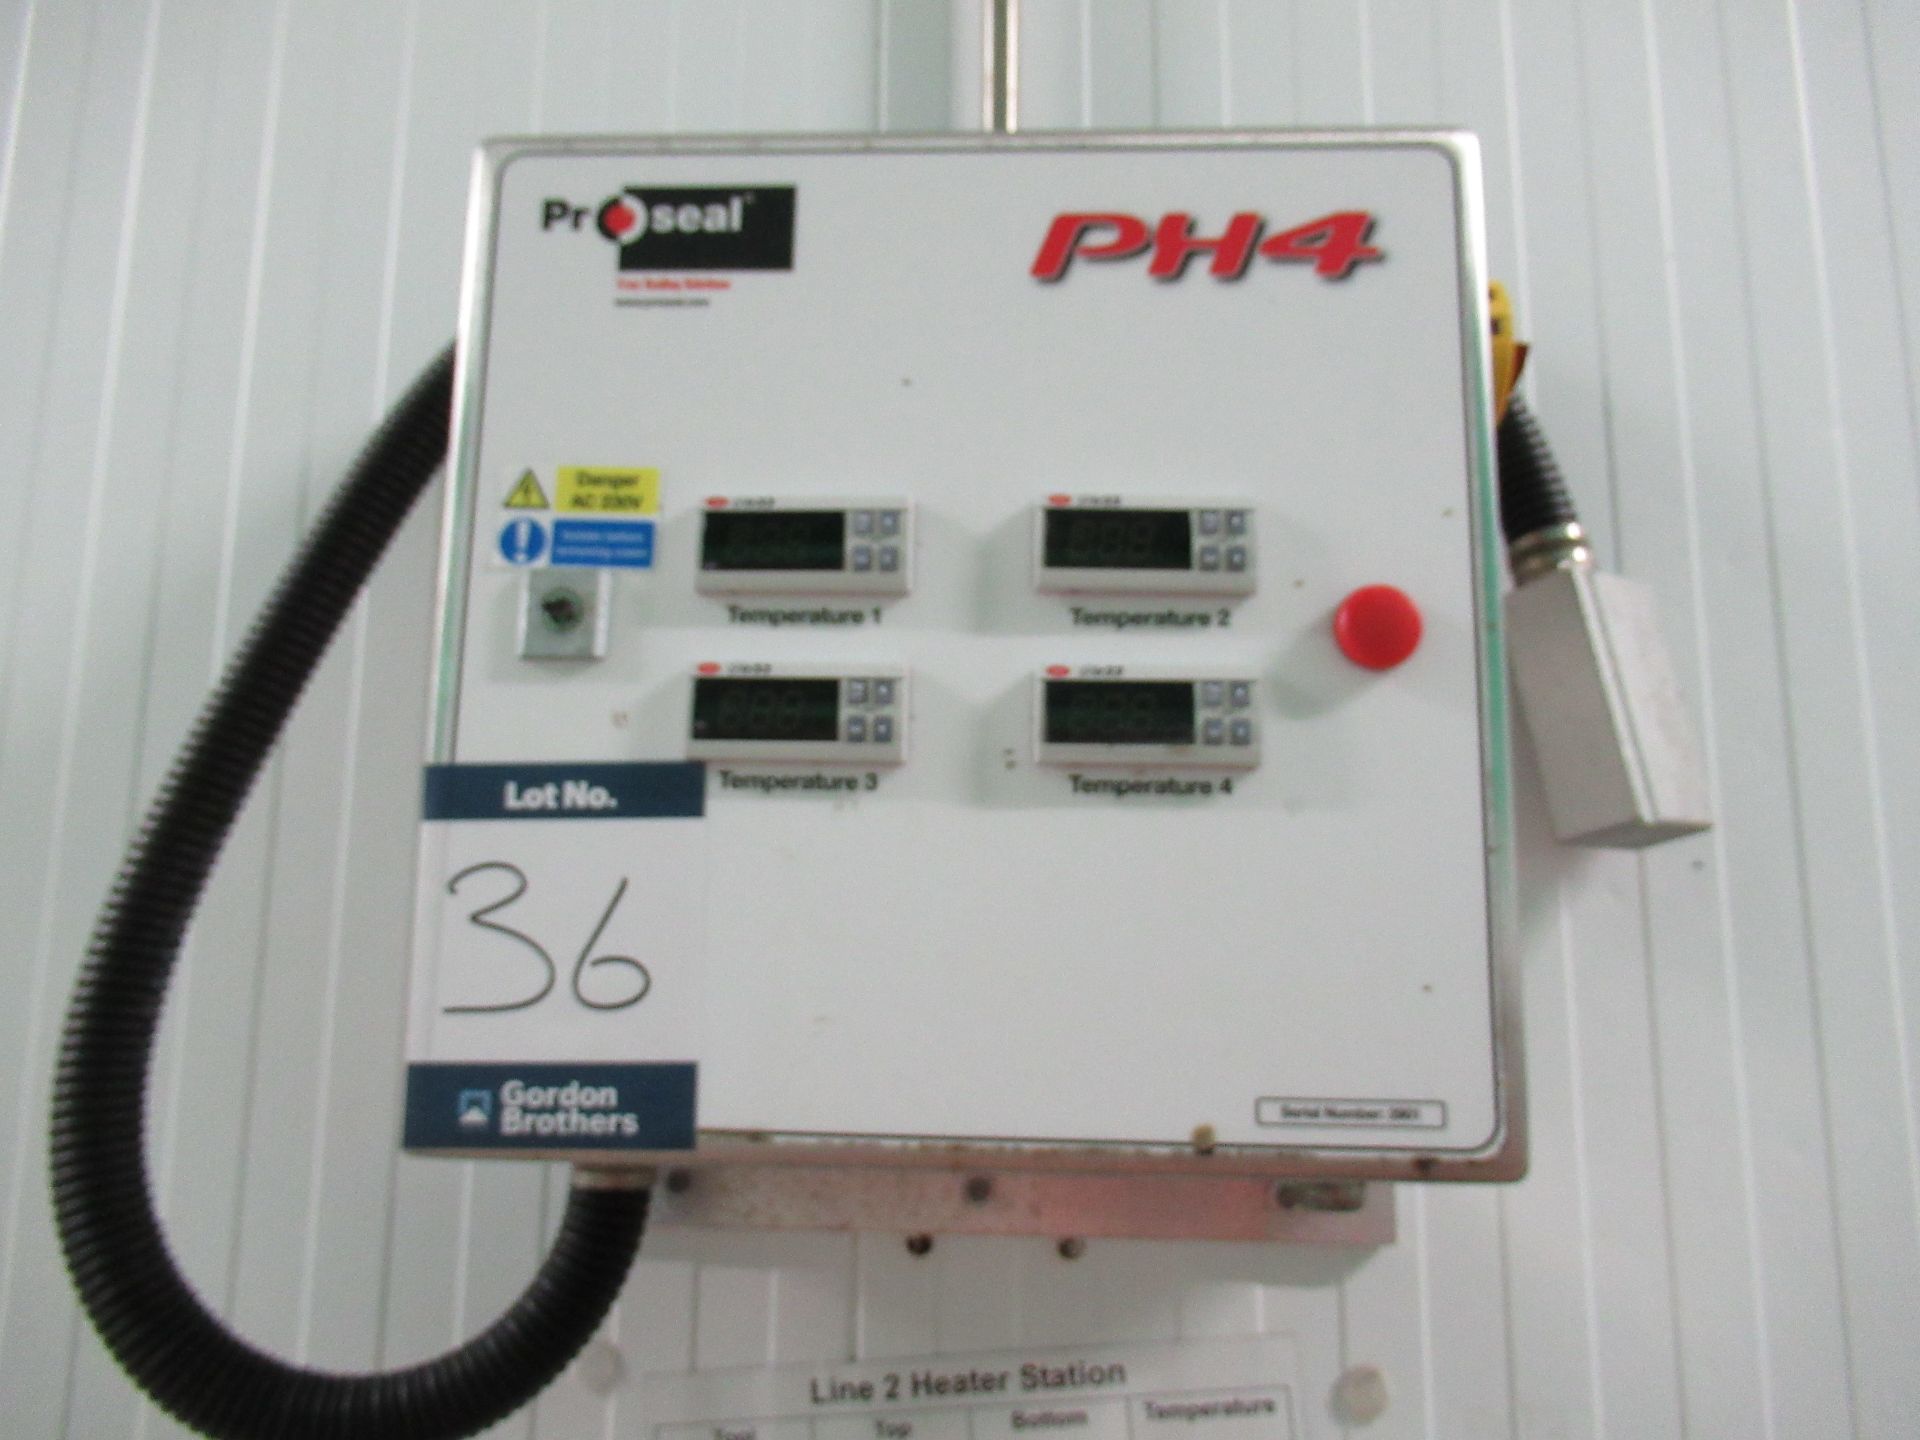 Proseal PH4 tool pre-heater panel. Serial no: 2901 wall mounted